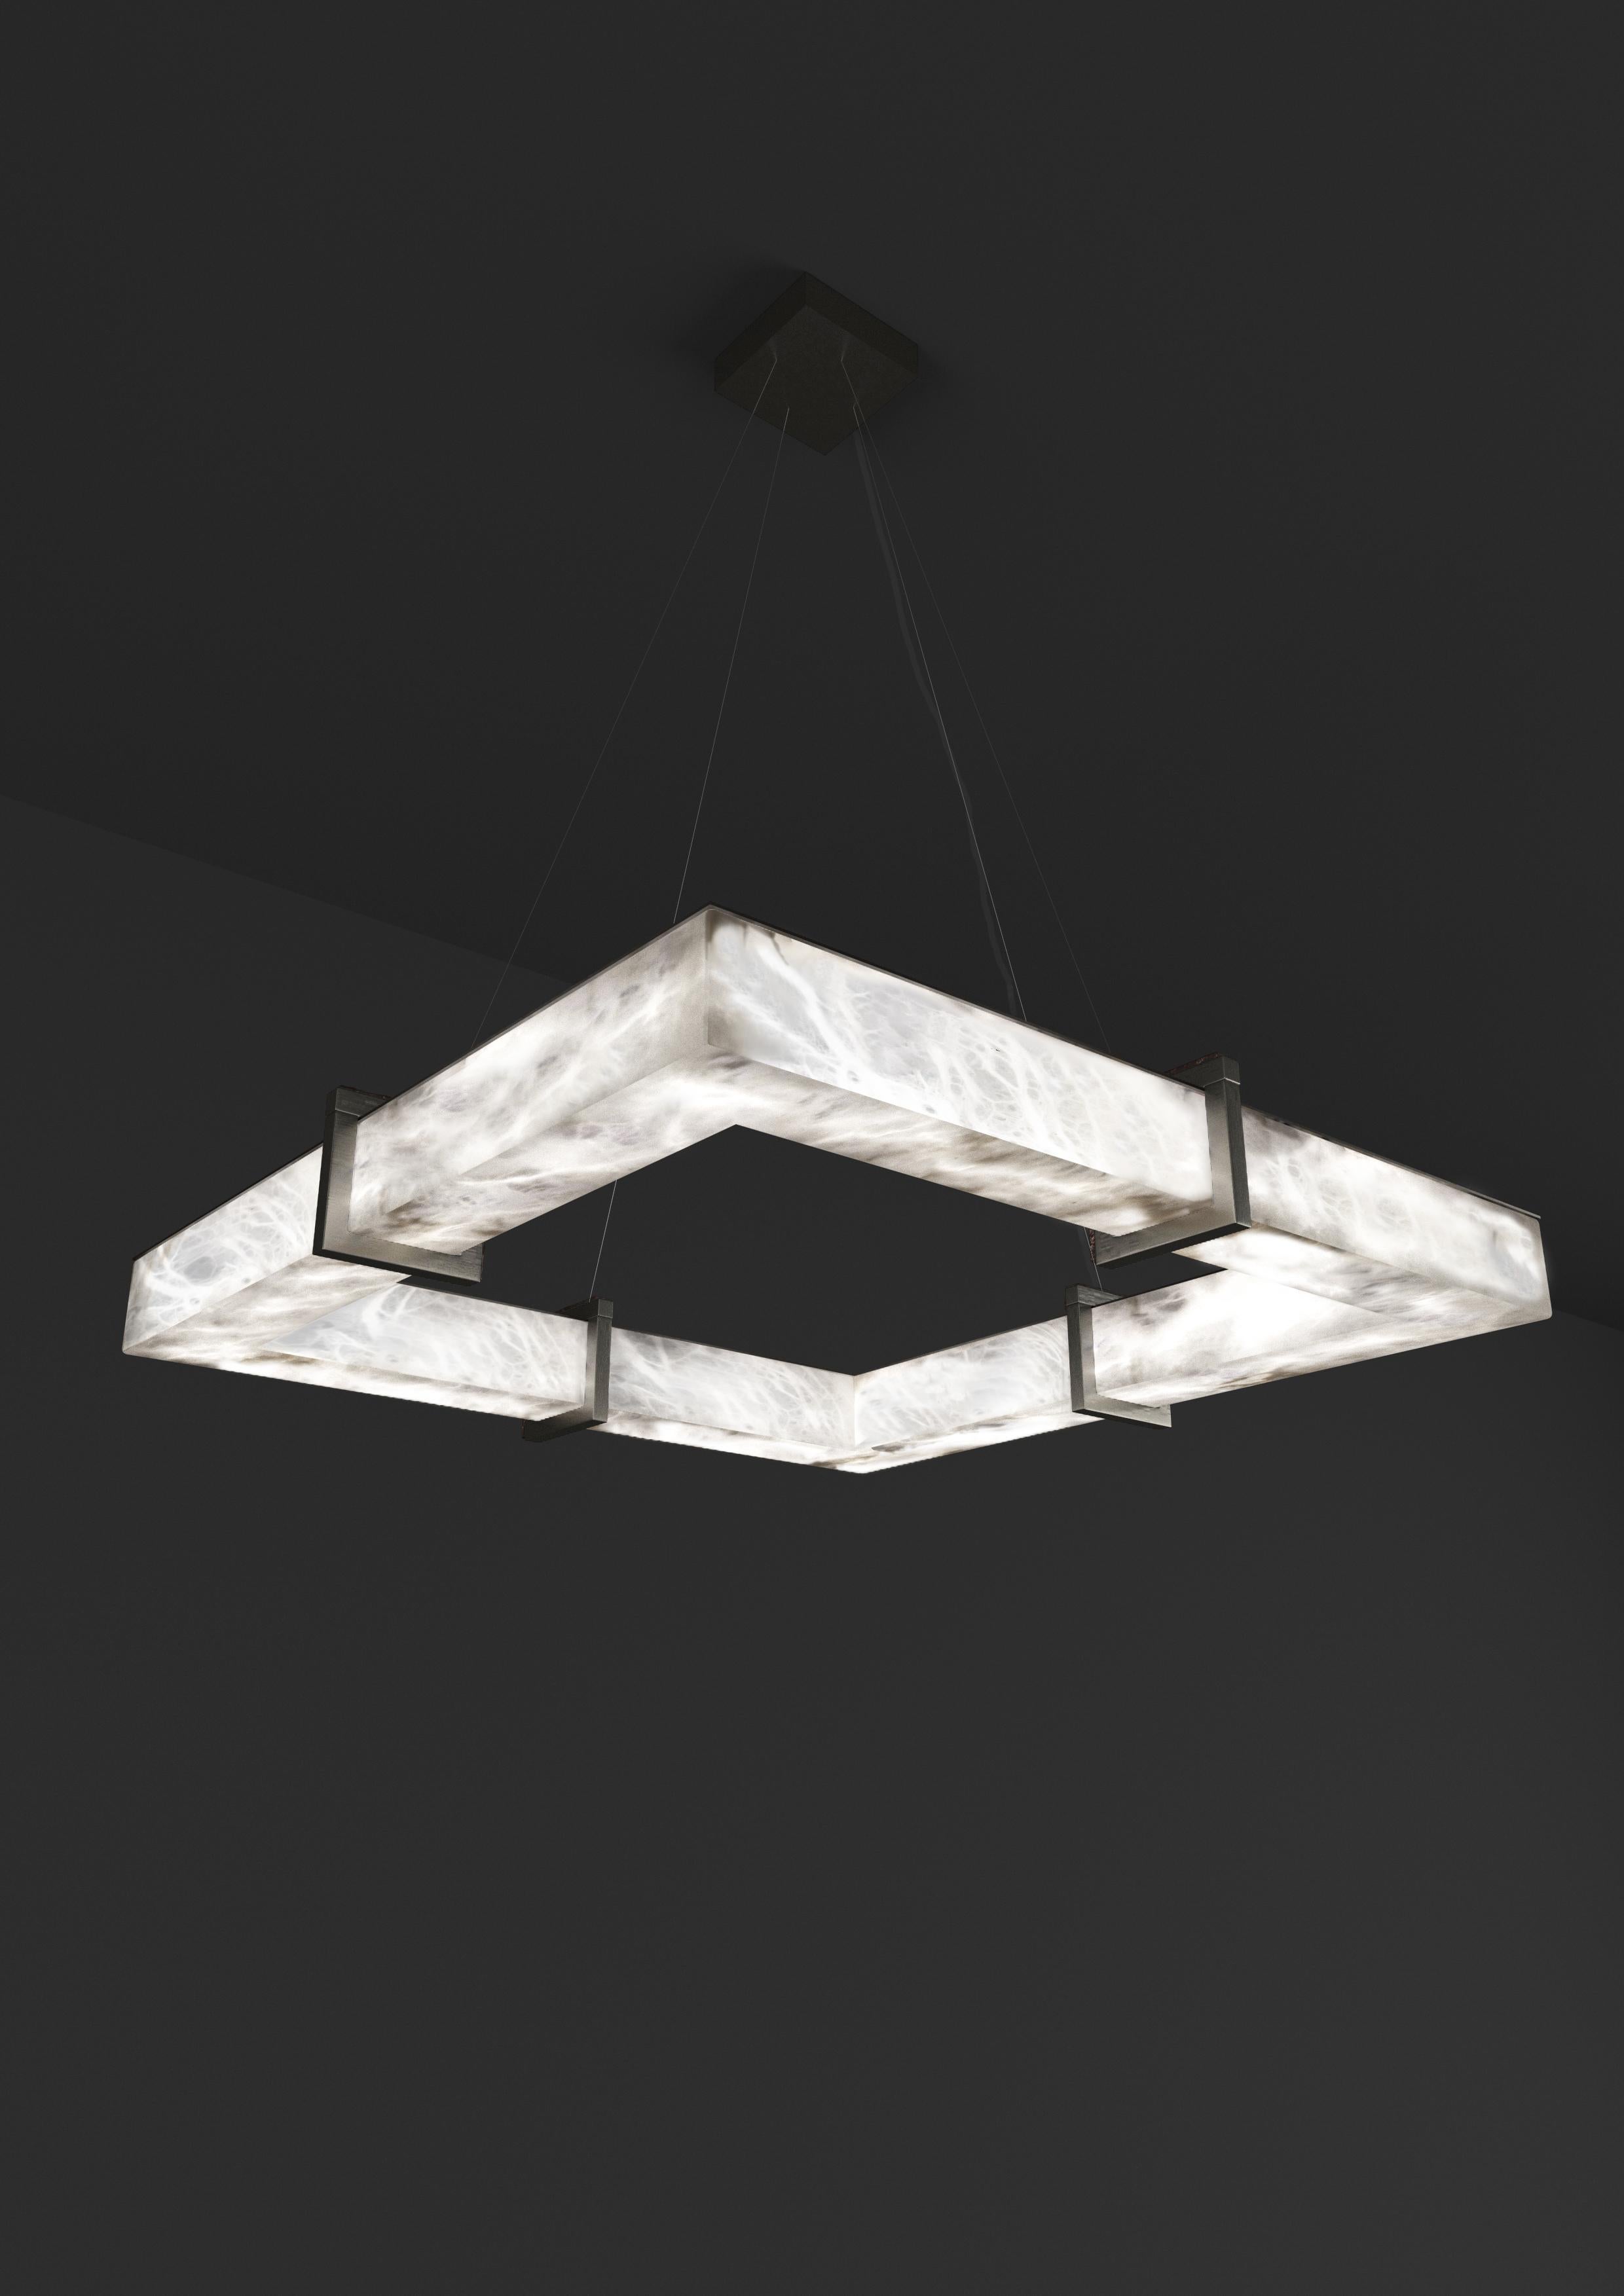 Talassa Brushed Black Metal Pendant Lamp by Alabastro Italiano
Dimensions: D 80 x W 80 x H 11 cm.
Materials: White alabaster and metal.

Available in different finishes: Shiny Silver, Bronze, Brushed Brass, Ruggine of Florence, Brushed Burnished,